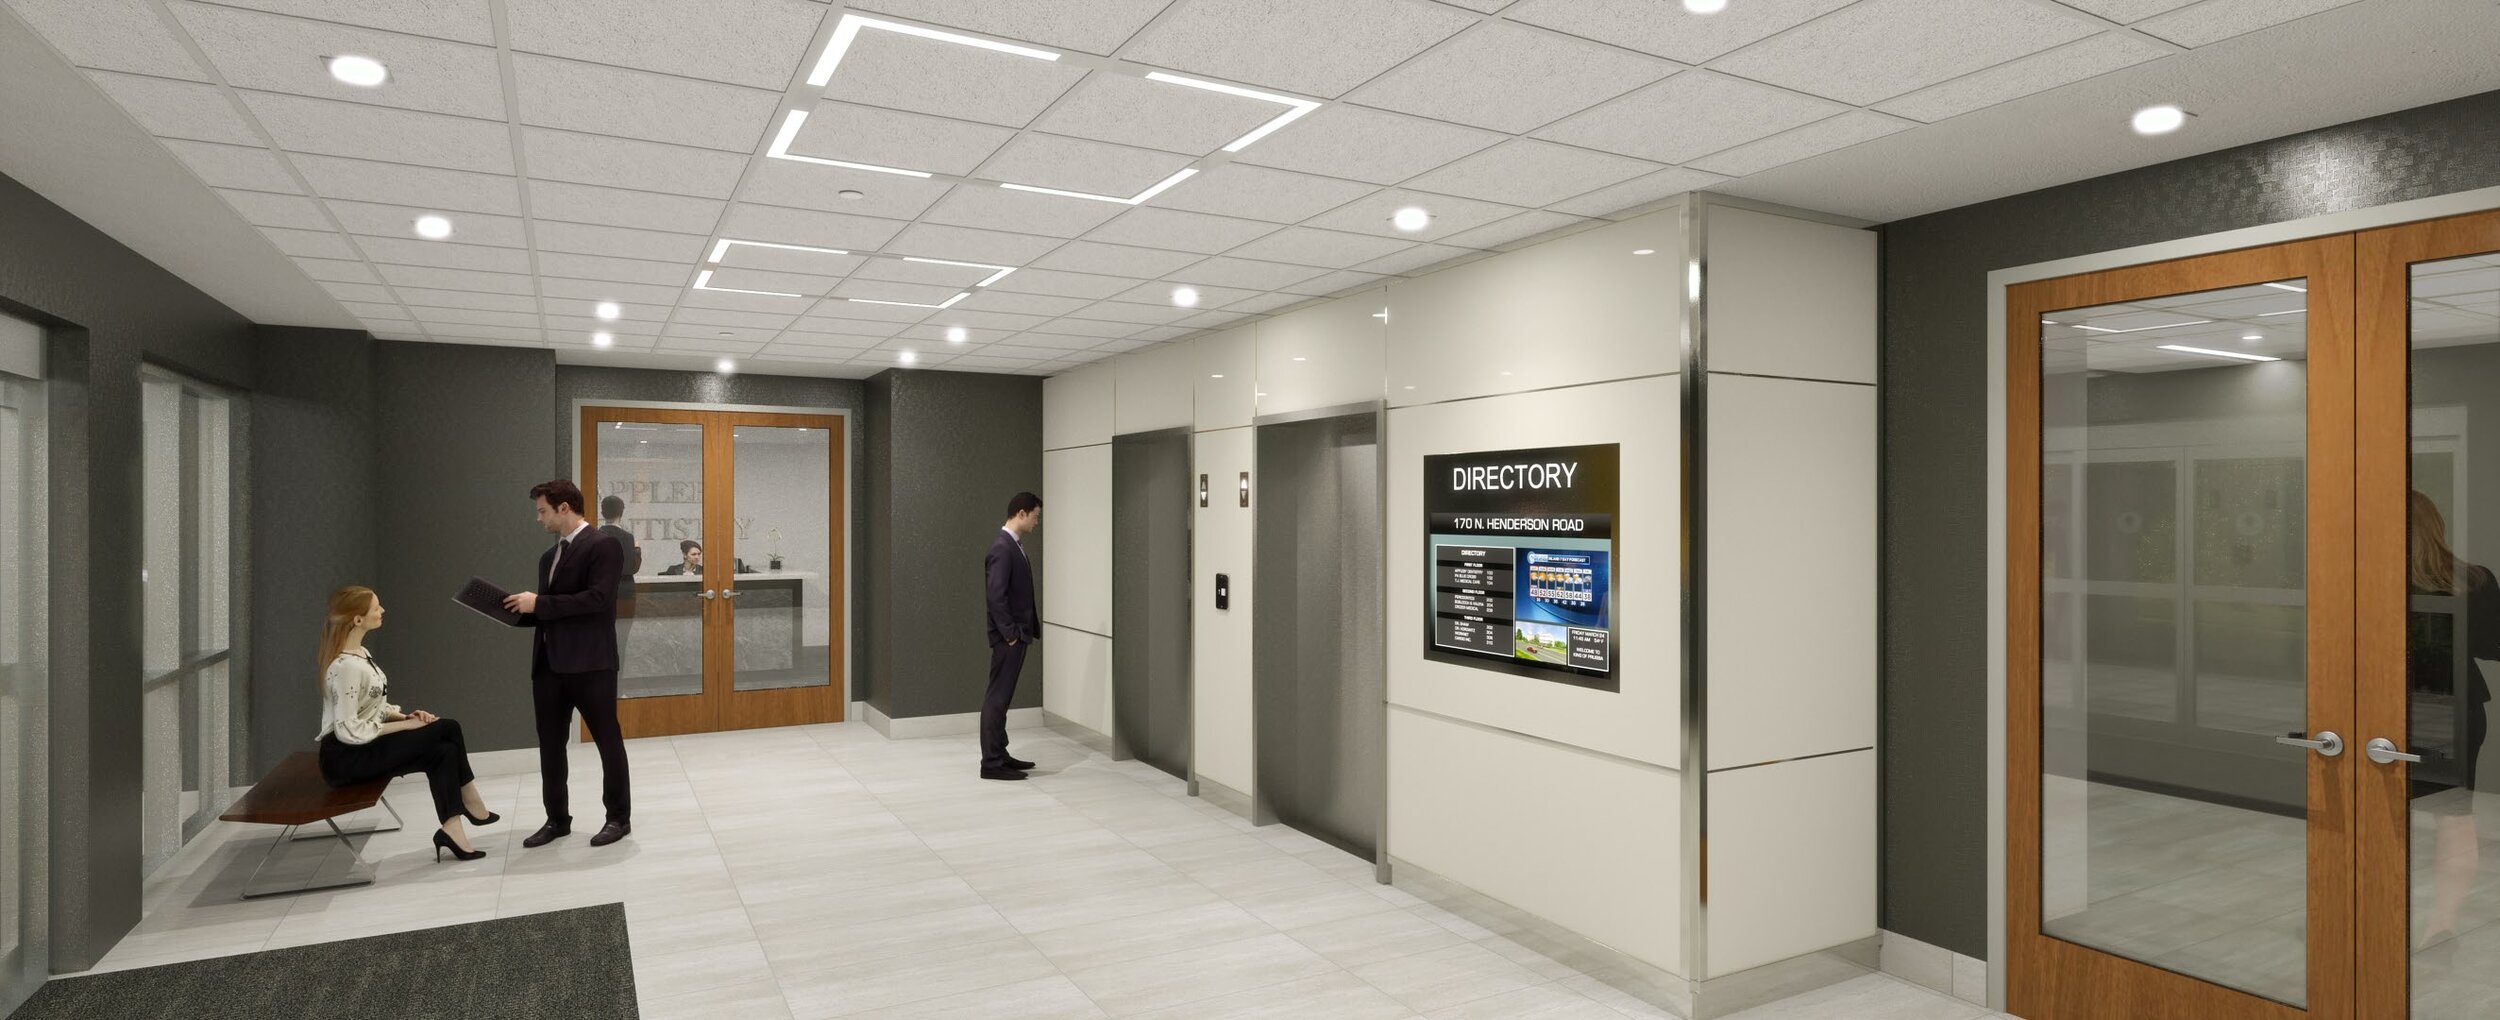 Proposed Office Building Interior Lobby